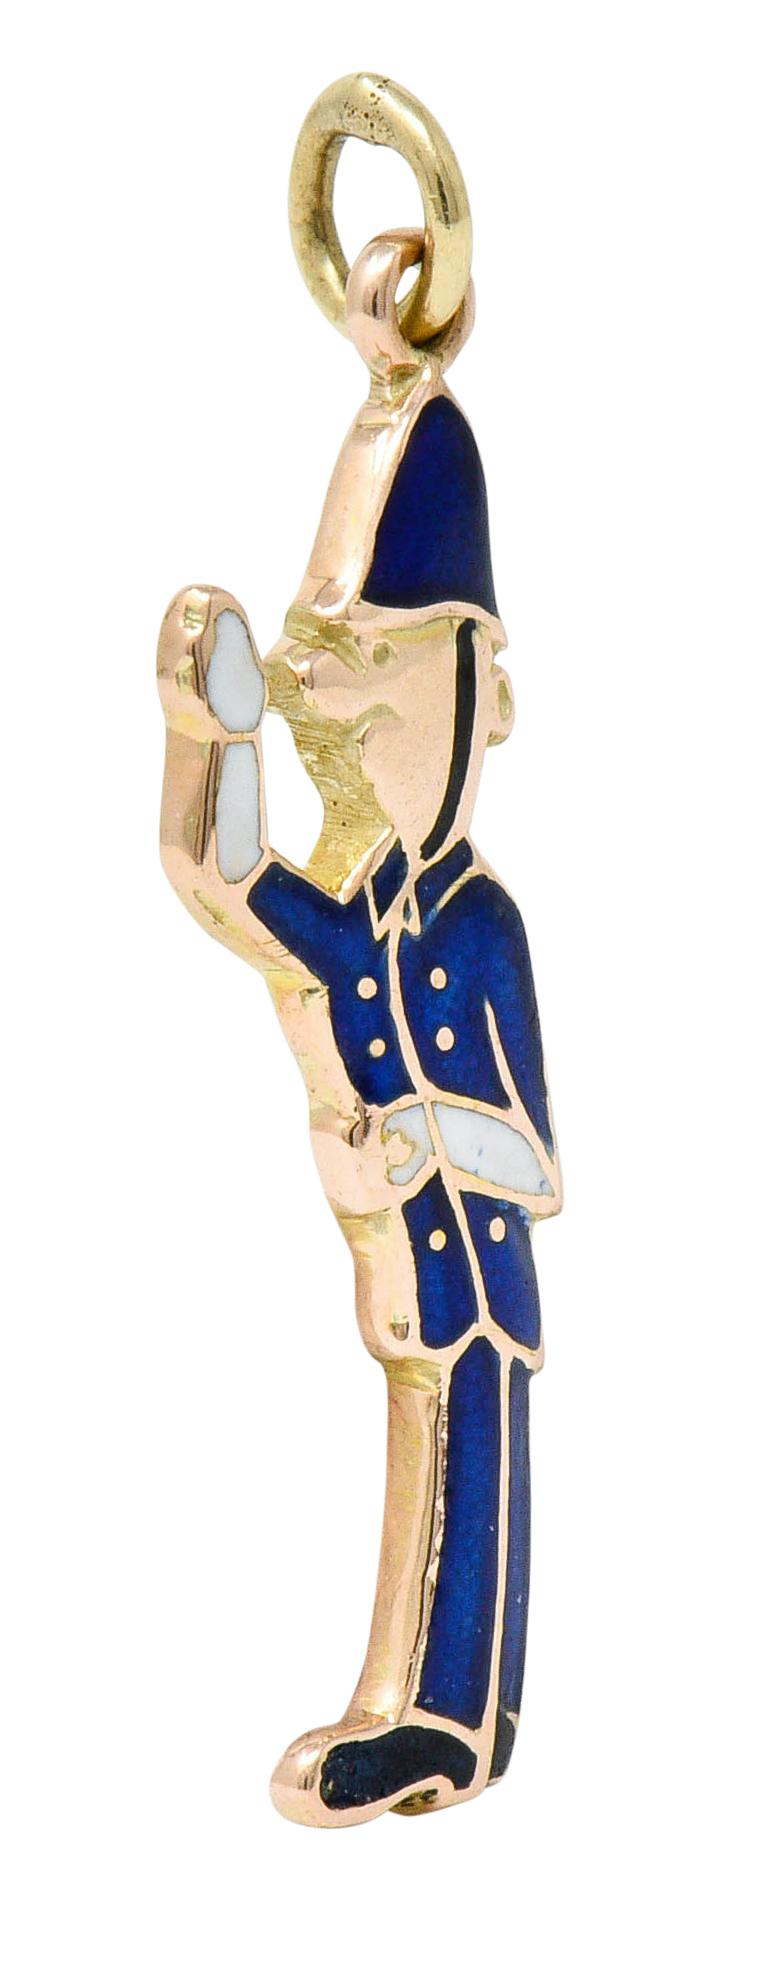 Designed as a British Bobby style police officer

Featuring a domed hat and uniform glossed with bright ultramarine blue enamel

With additional black and white enamel details

Exhibiting no loss

Maker's mark and British hallmarks for 9 karat gold,